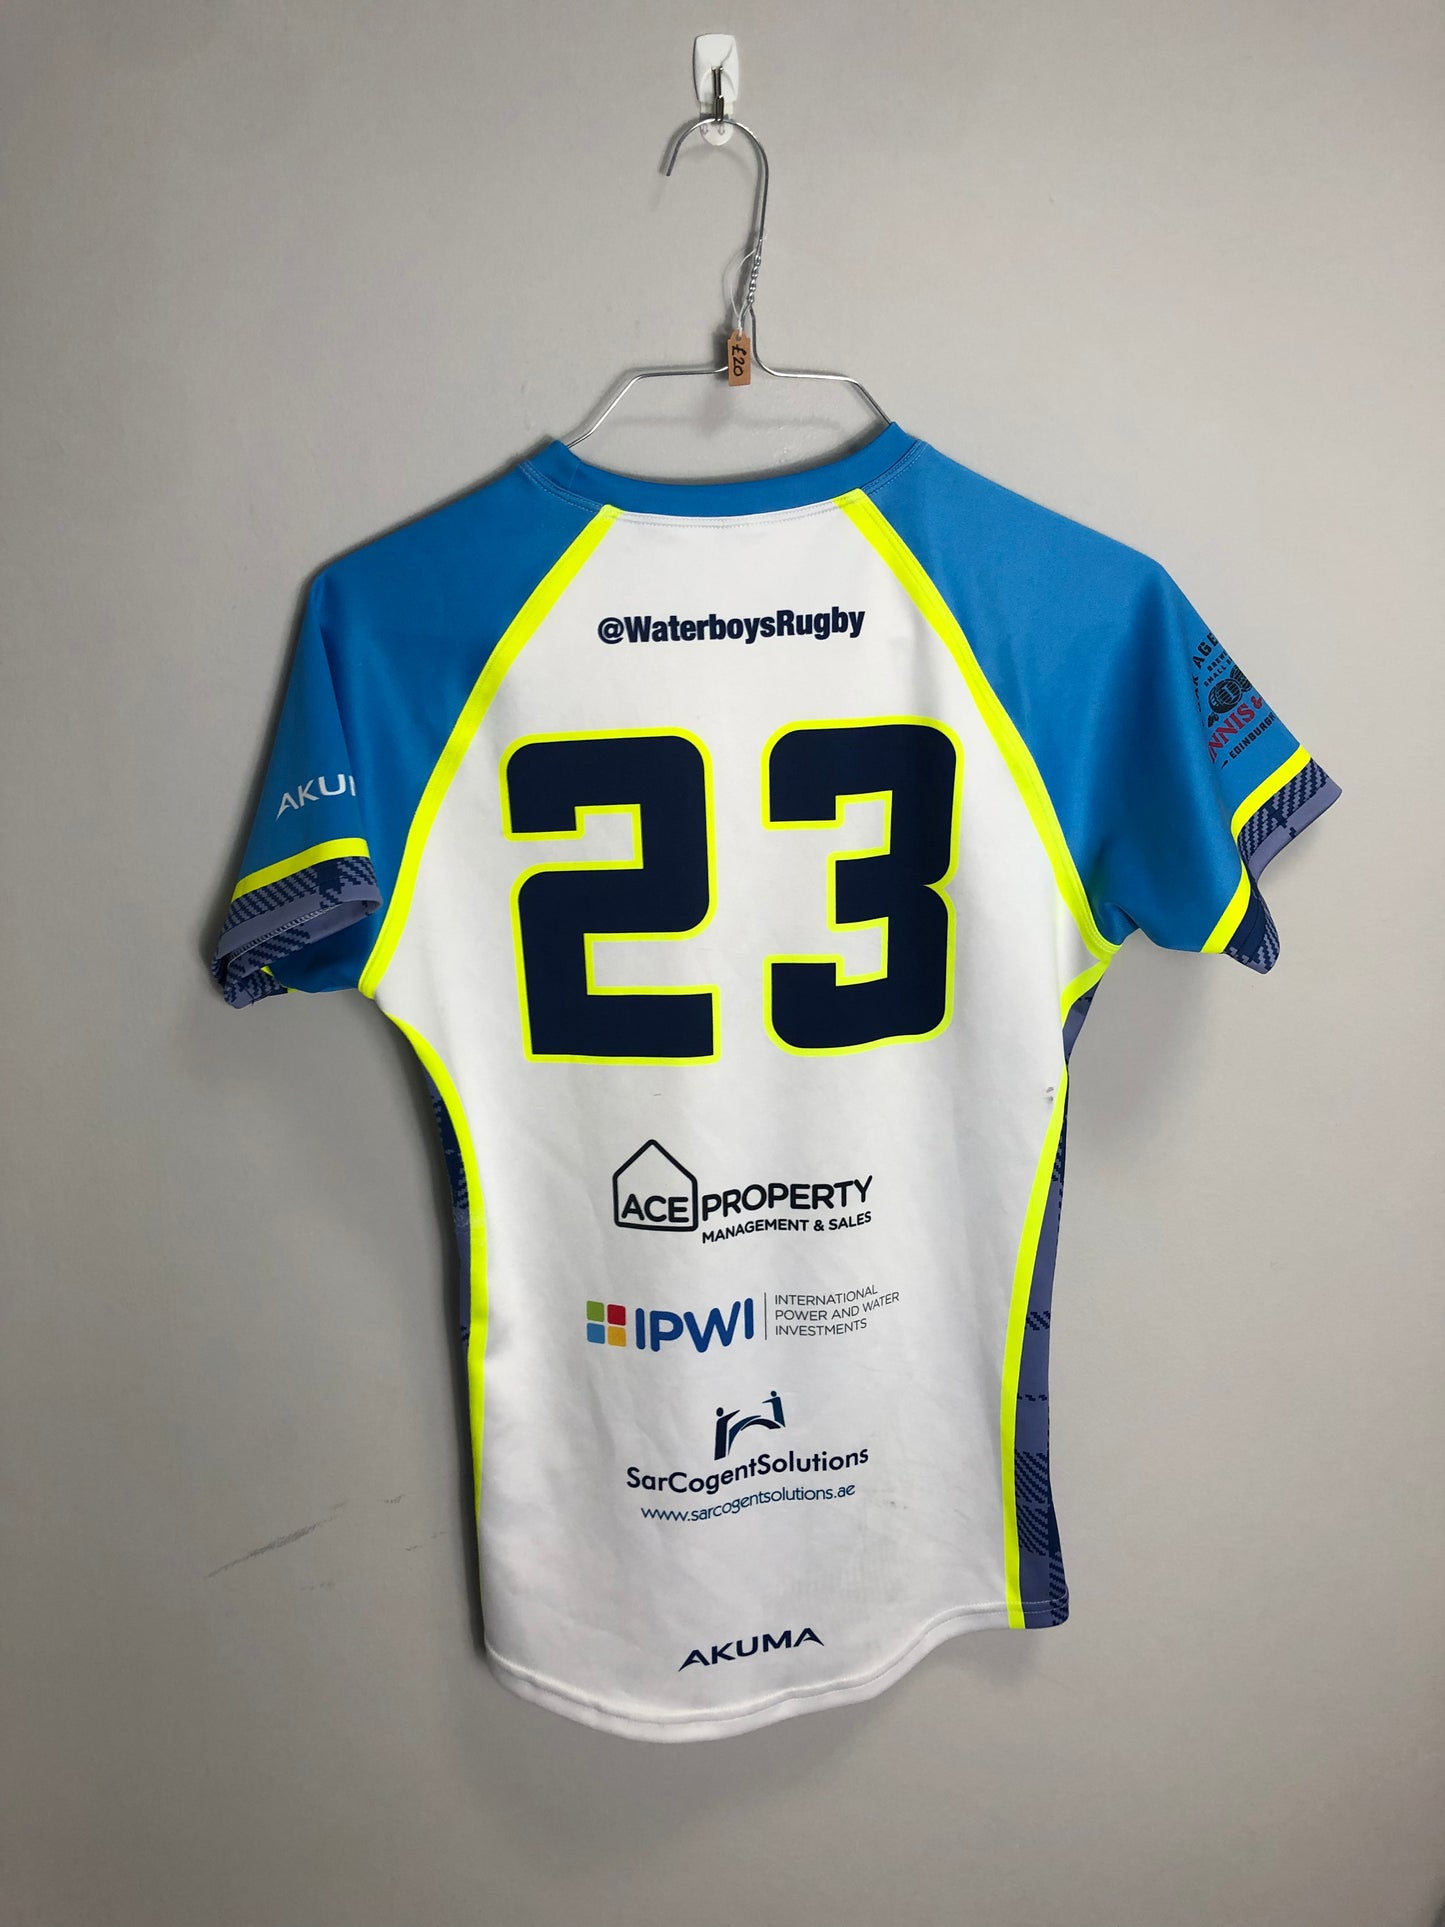 Waterboys Rugby 7s Match Worn Shirt - #23 - 37” Chest